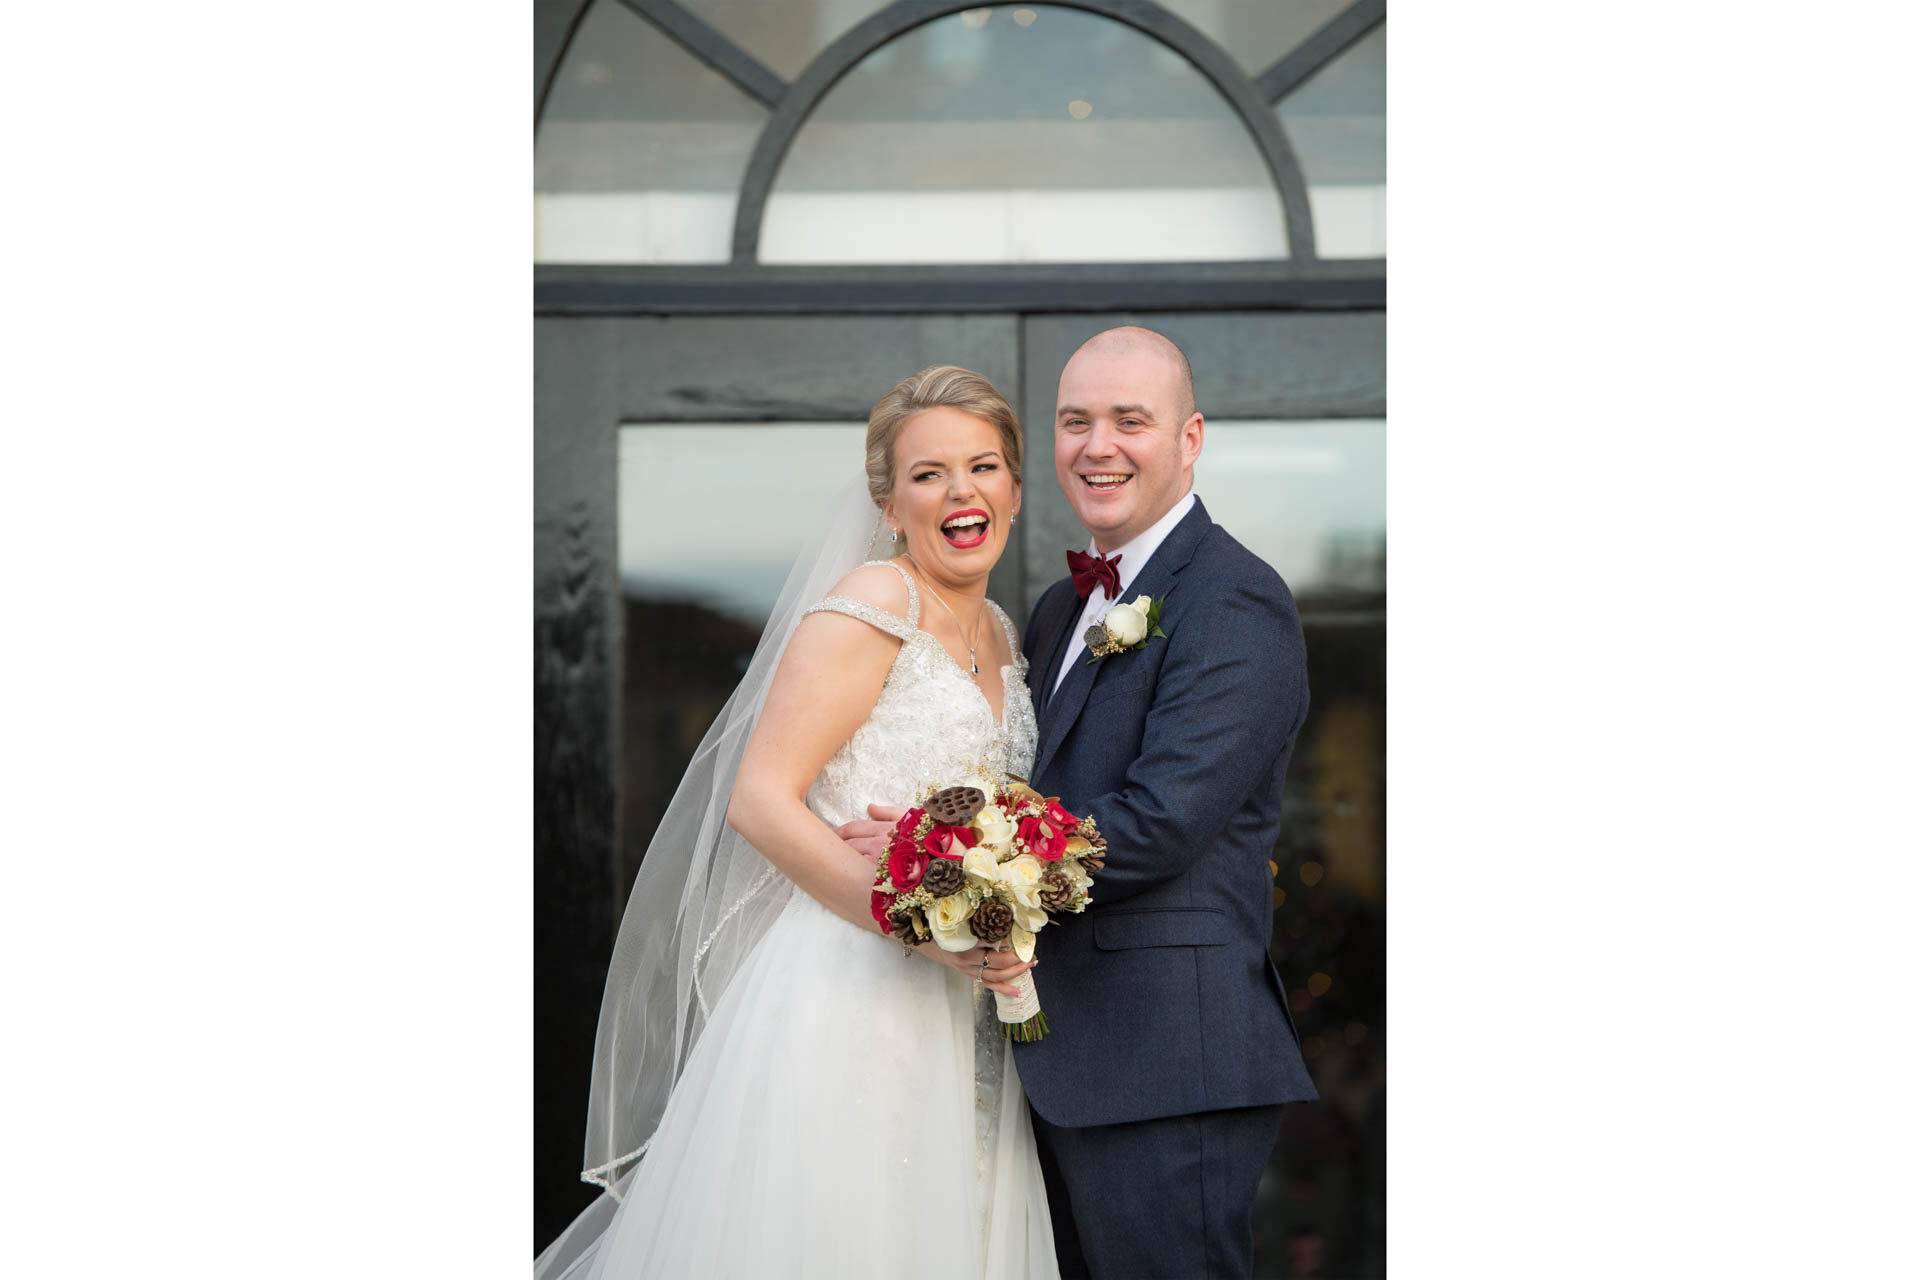 Picture of Tayna and Niall at Cavan Crystal Hotel, Cavan, on their wedding day captured by Fermanagh, Tyrone and Northern Ireland Wedding Photographer, Trevor Lucy Photography